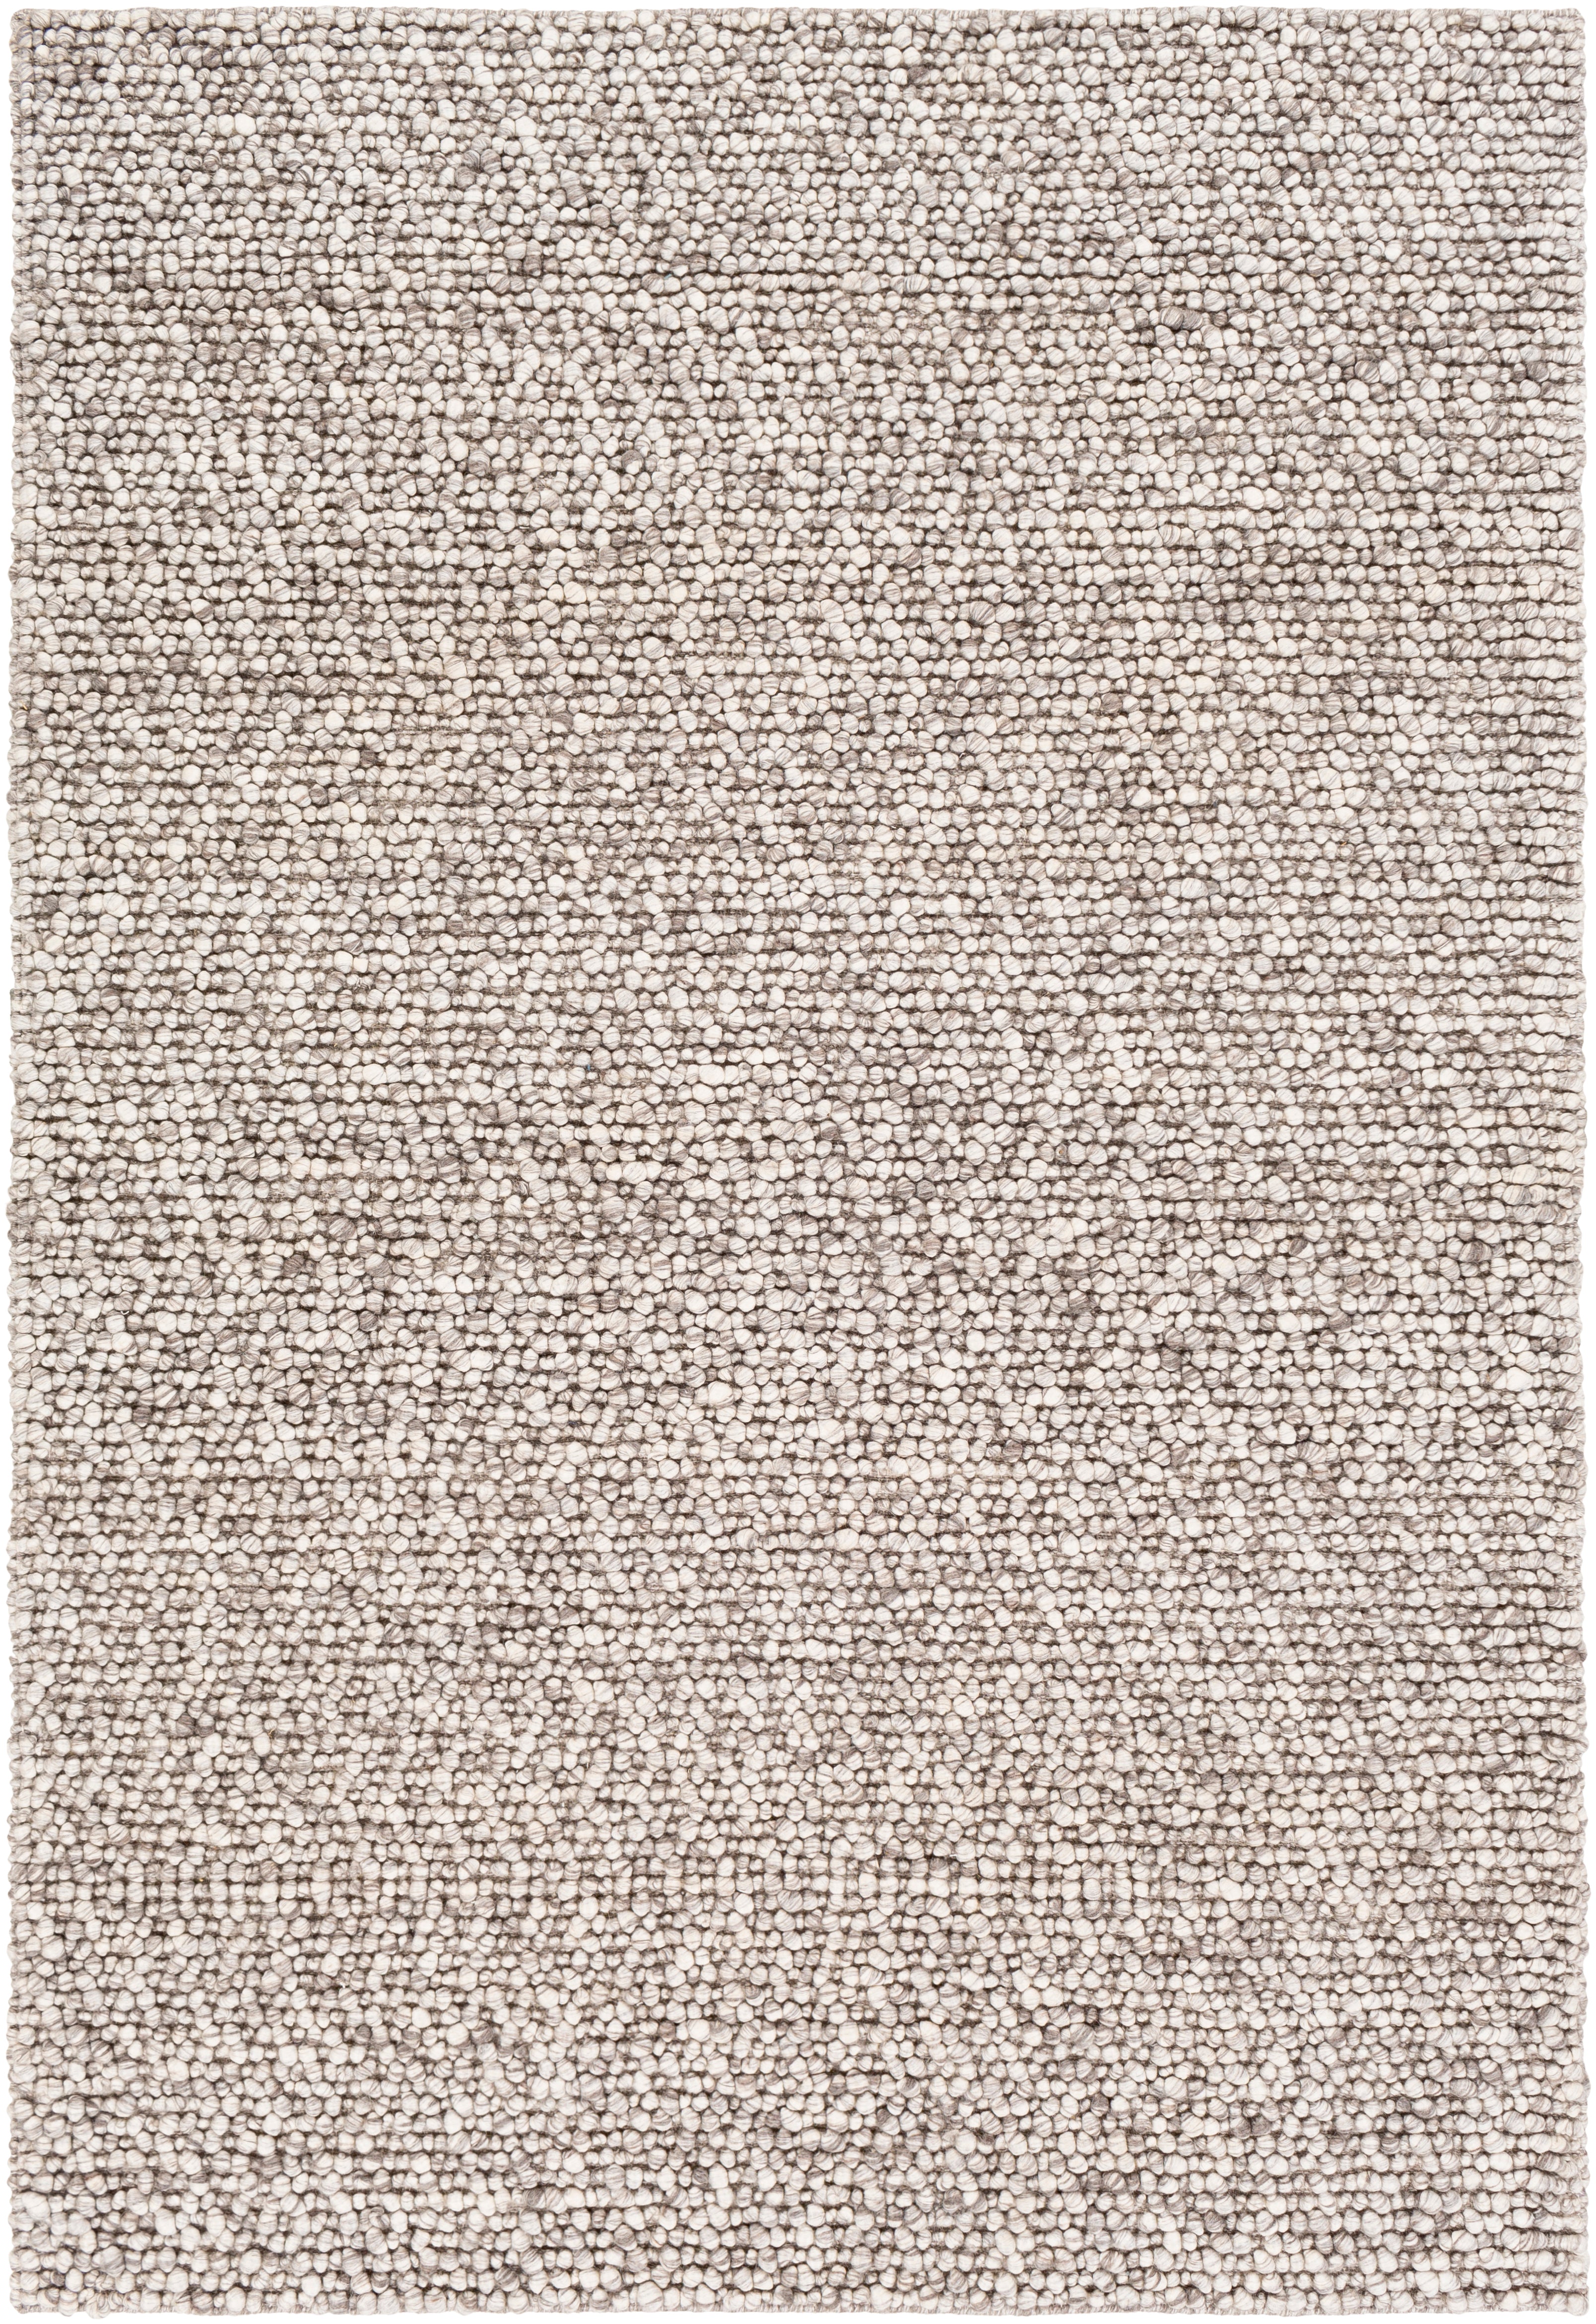 The Ambergris rug is made up of light grey and ivory colours.